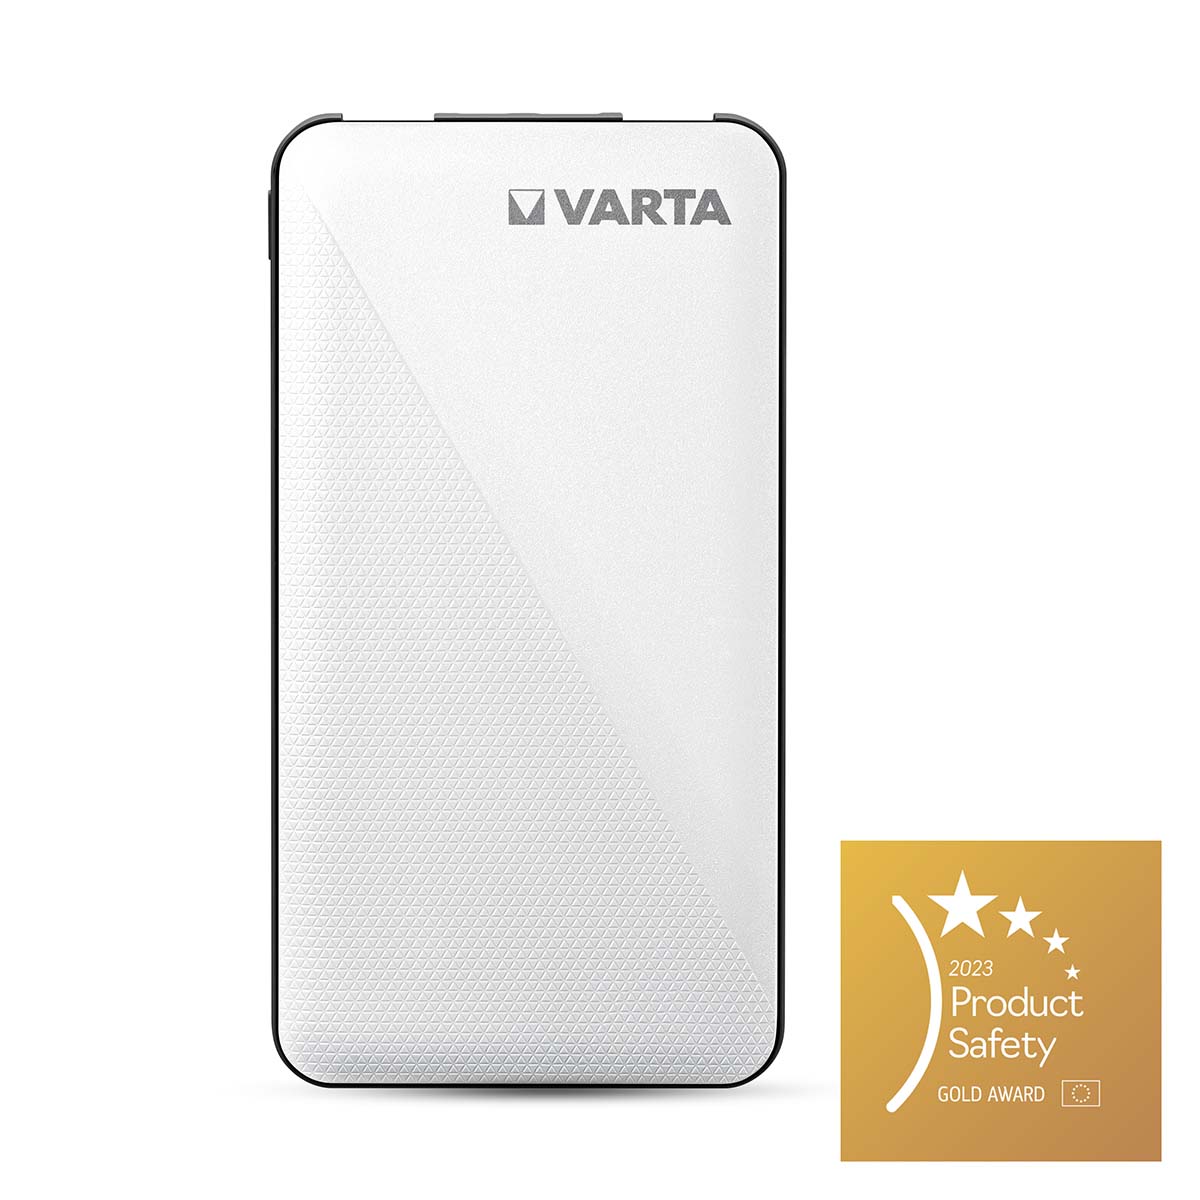 Varta Power Bank Energy 5000mAh including 2.4A USB-C In/Out